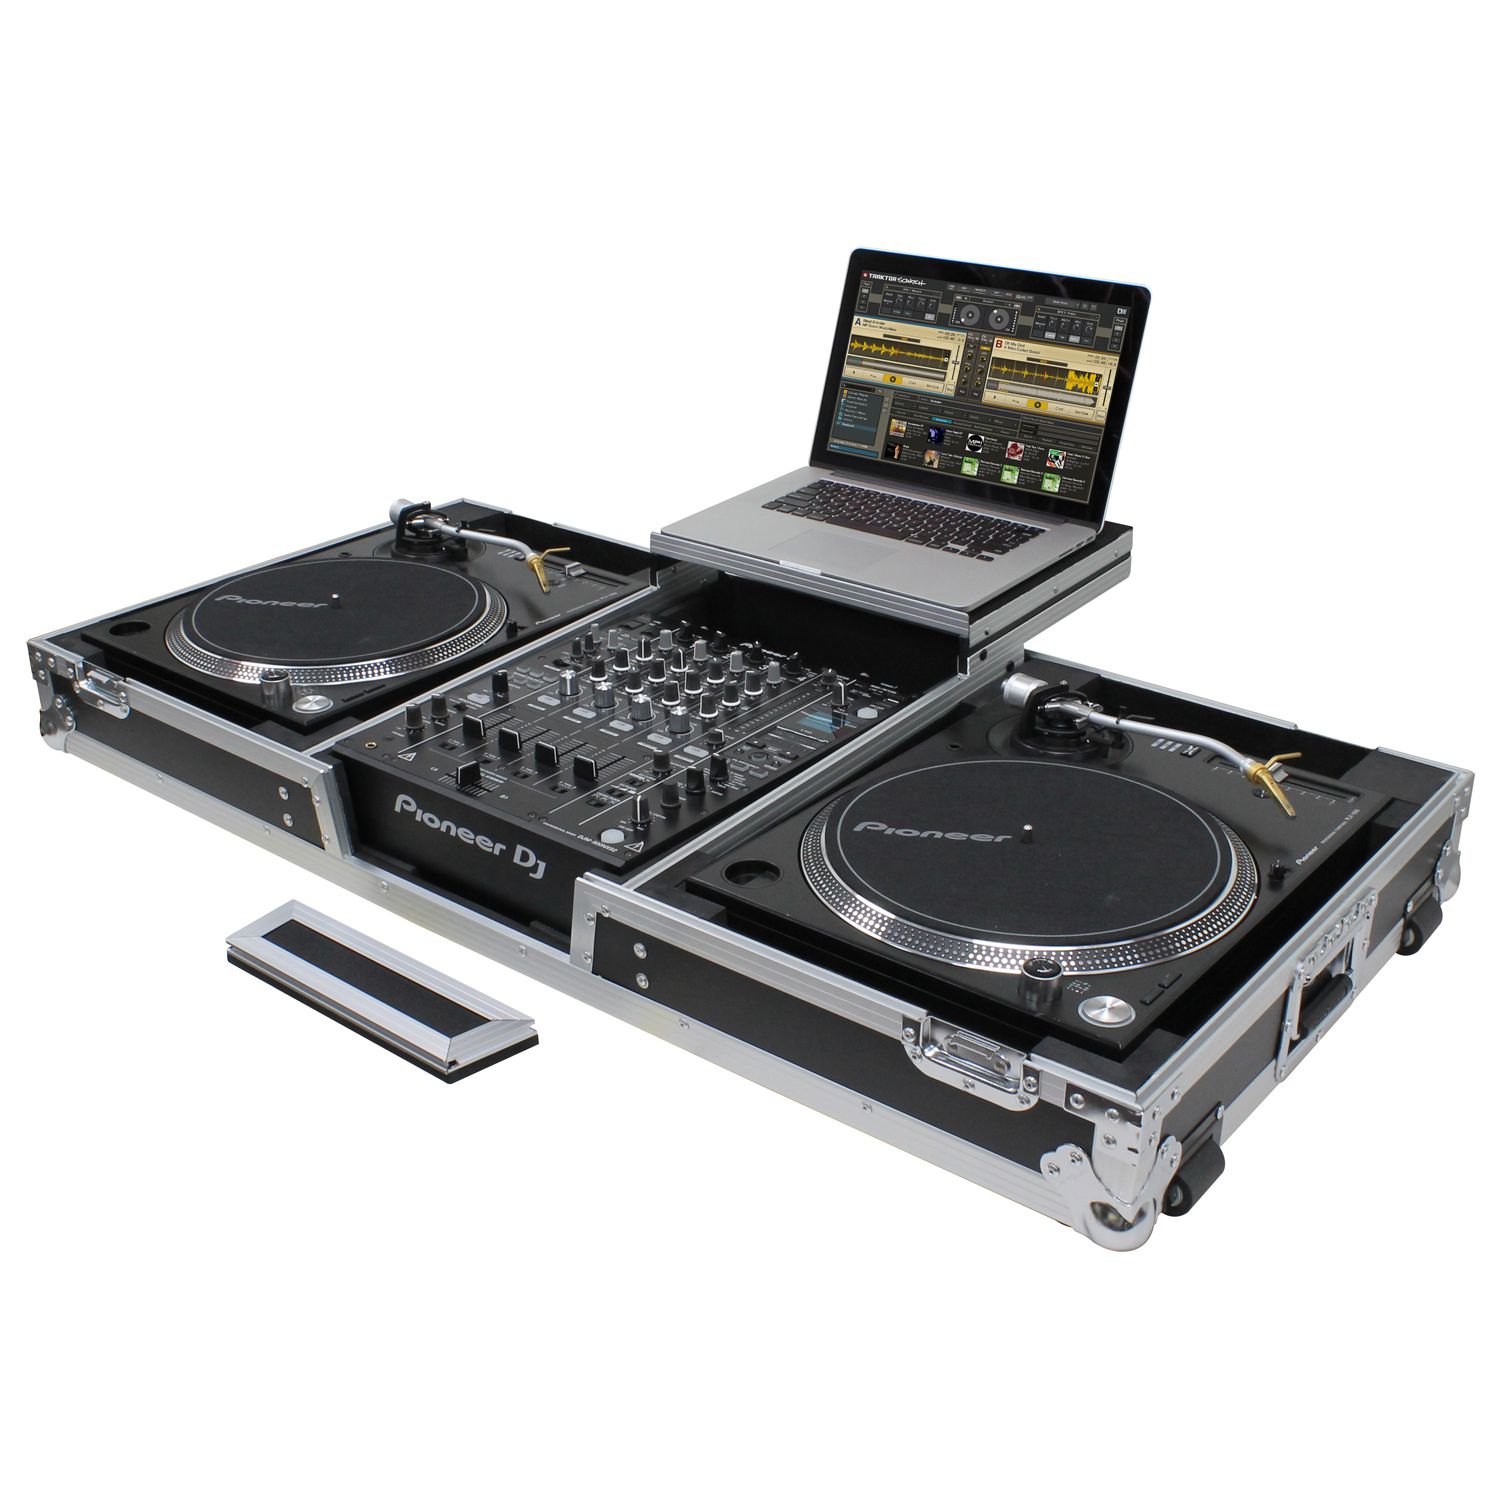 Low Profile 12" Format DJ Mixer and Battle Position Turntables Coffin with Wheels and Glide Platform - Odyssey